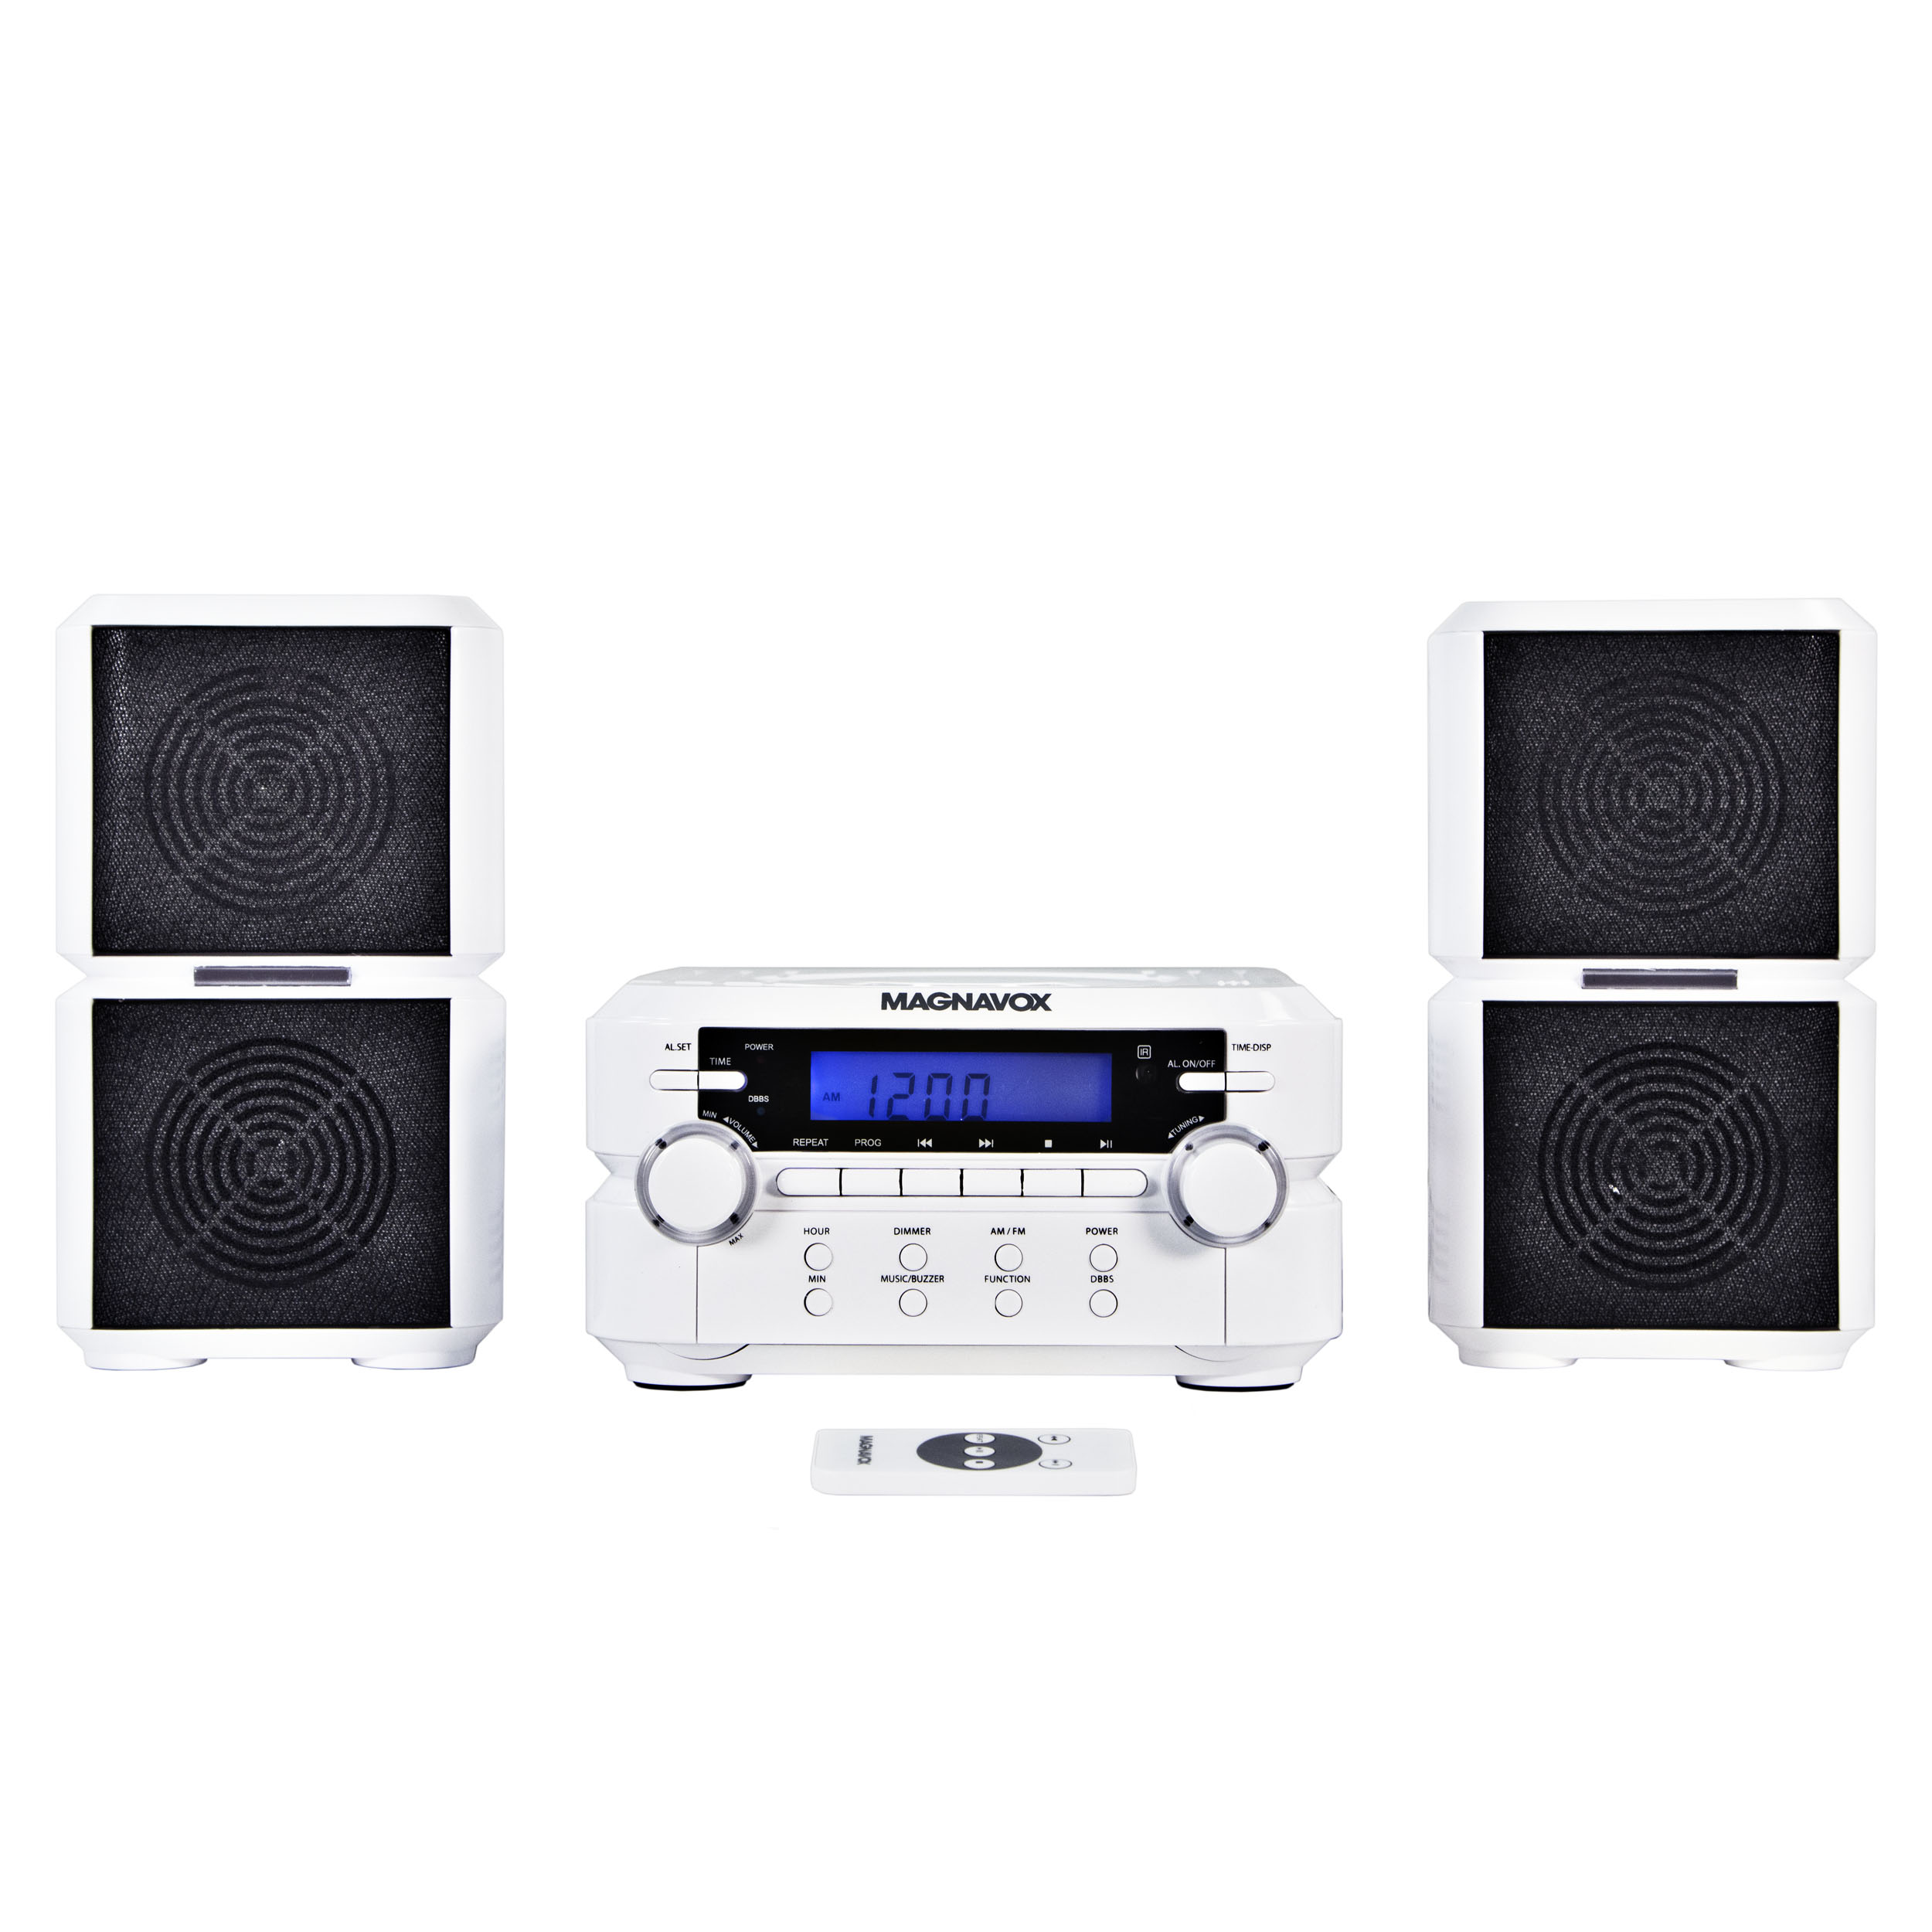 Magnavox MM435-WH 3-Piece Compact CD Shelf System with Digital AM/FM Stereo Radio, Bluetooth Wireless Technology, and Remote Control in White, LCD Display, AUX Port Compatible - image 1 of 3